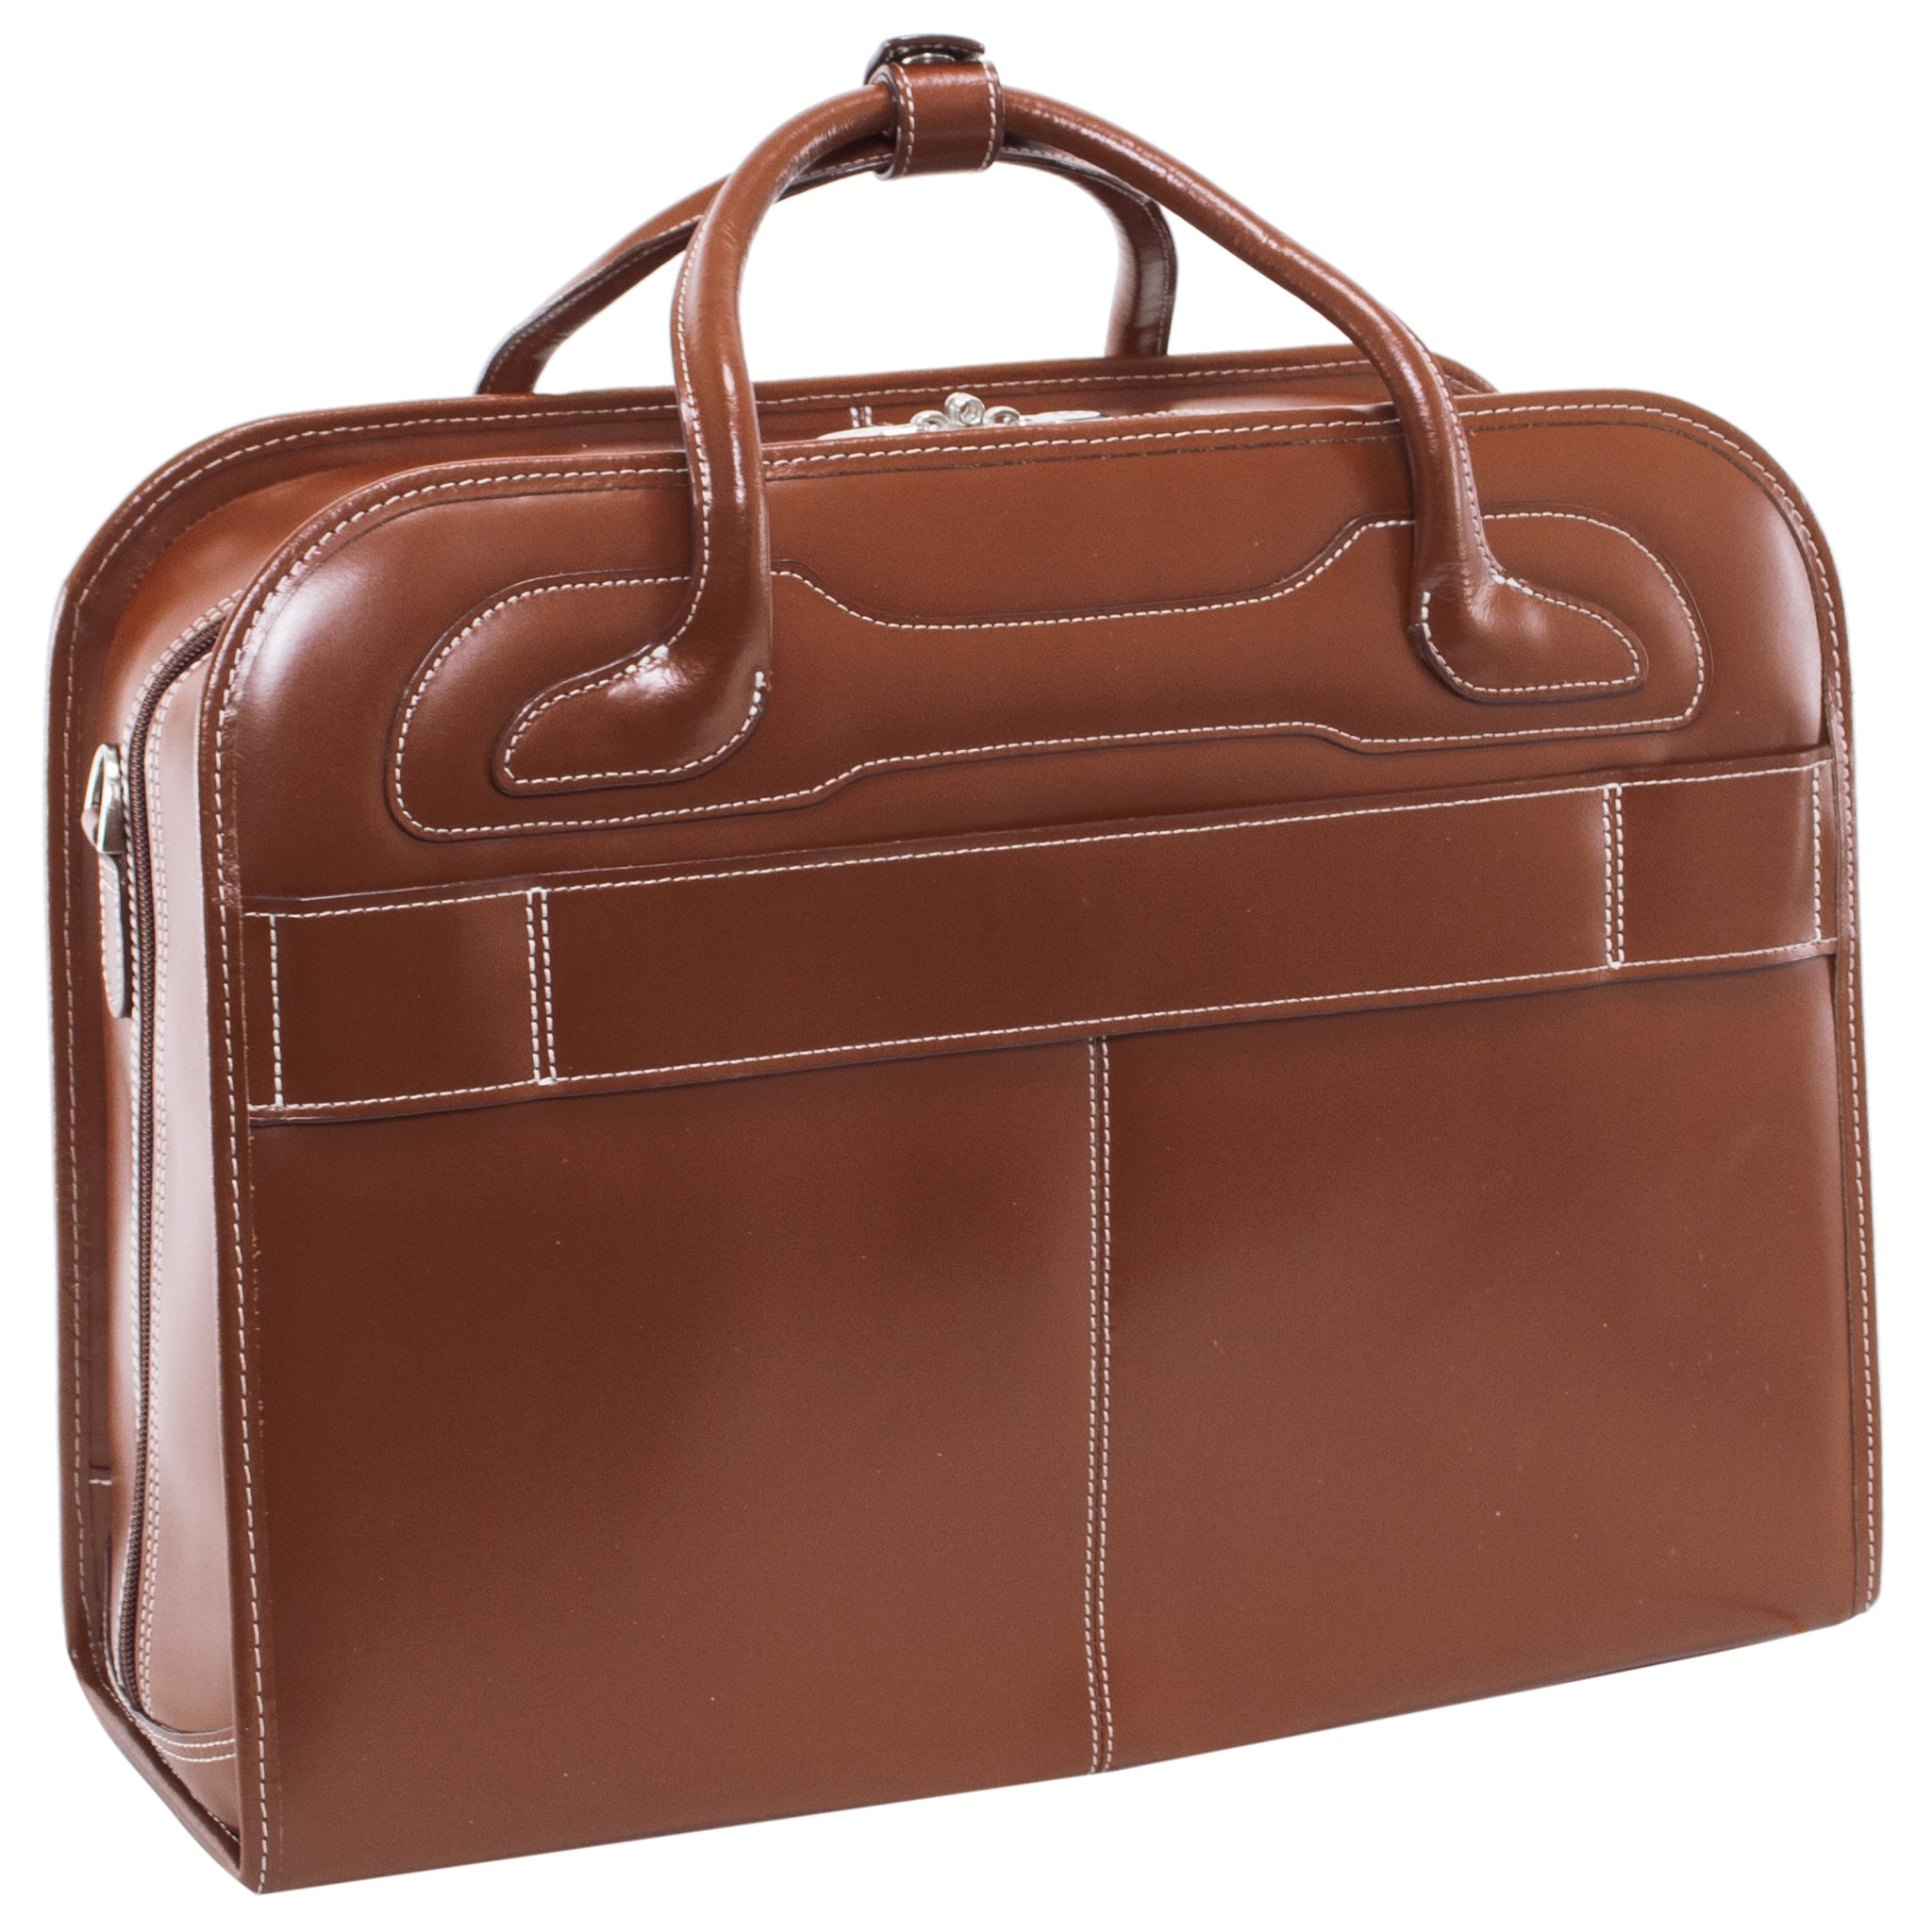 McKlein WILLOWBROOK 17" Leather Patented Detachable -Wheeled Ladies' Laptop Briefcase